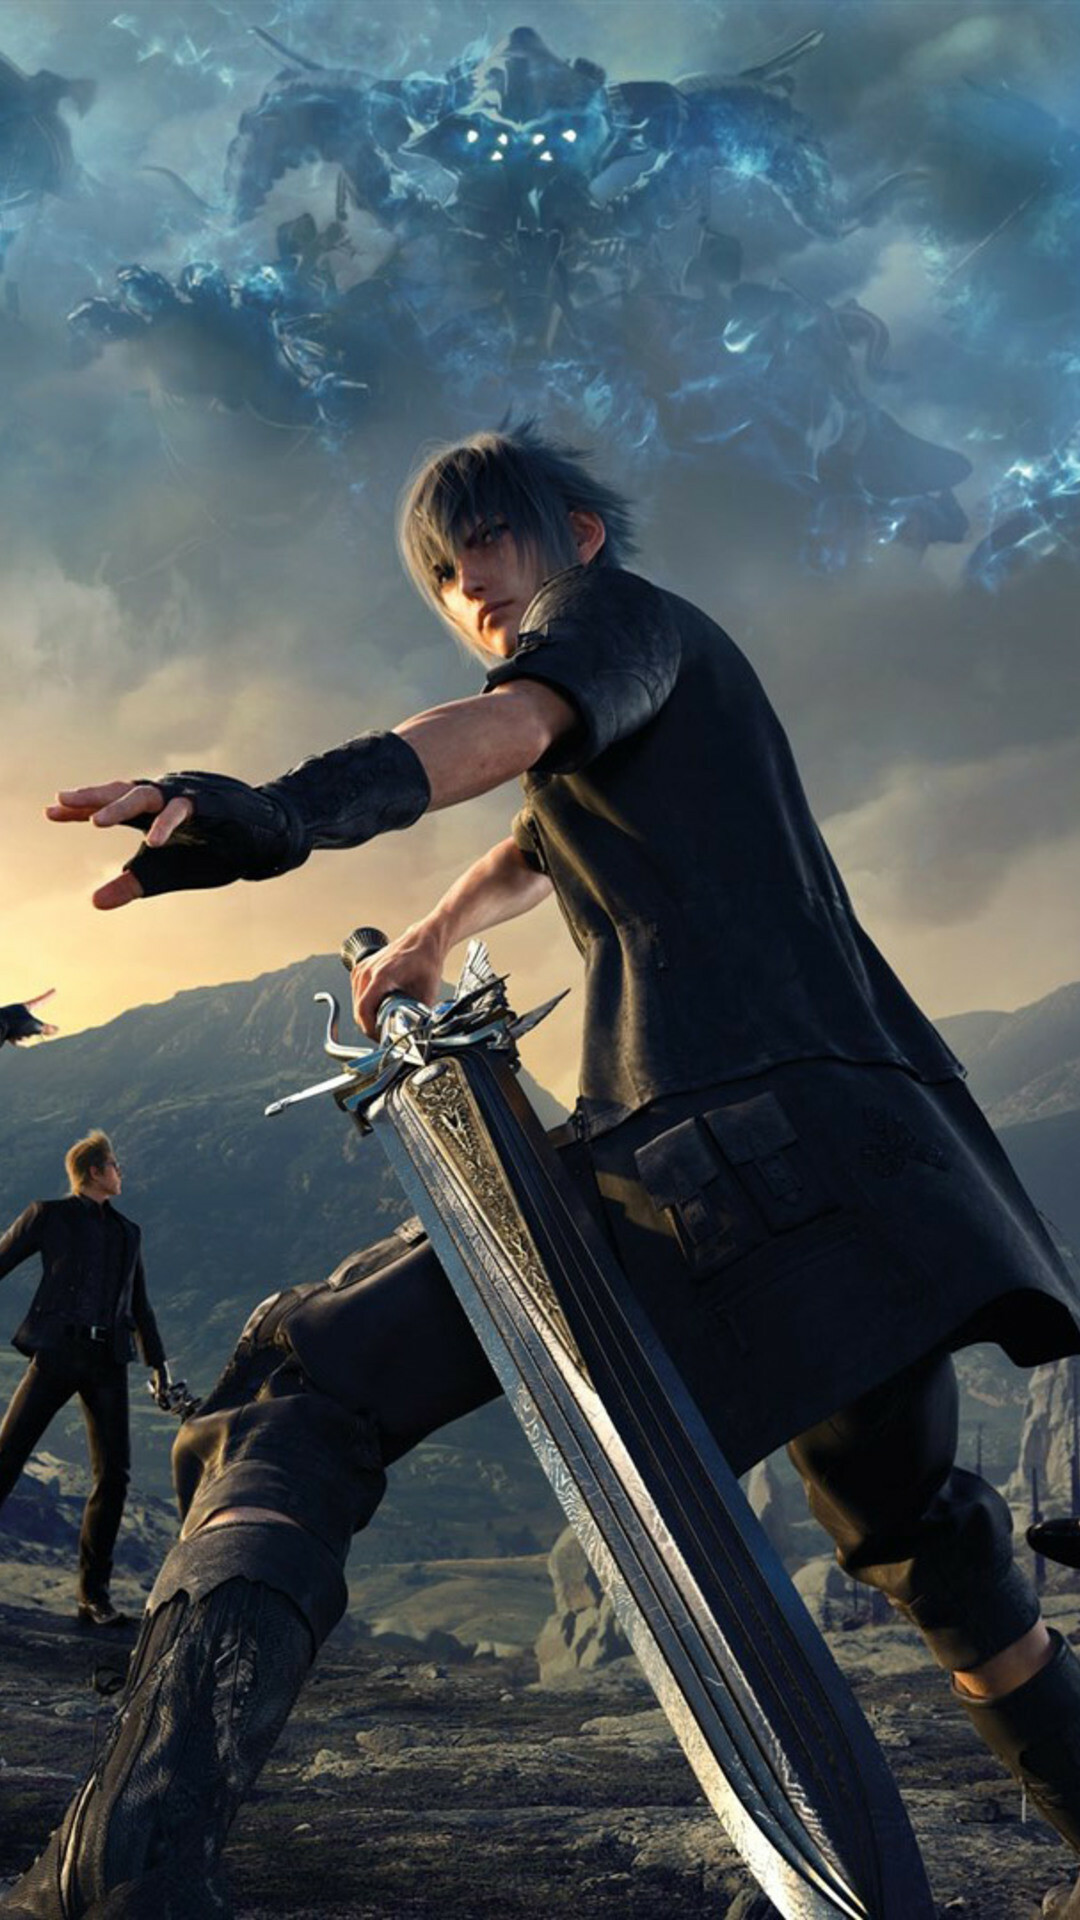 Final Fantasy XIV: FF15, Open world environment, Action-based battle system. 1080x1920 Full HD Background.